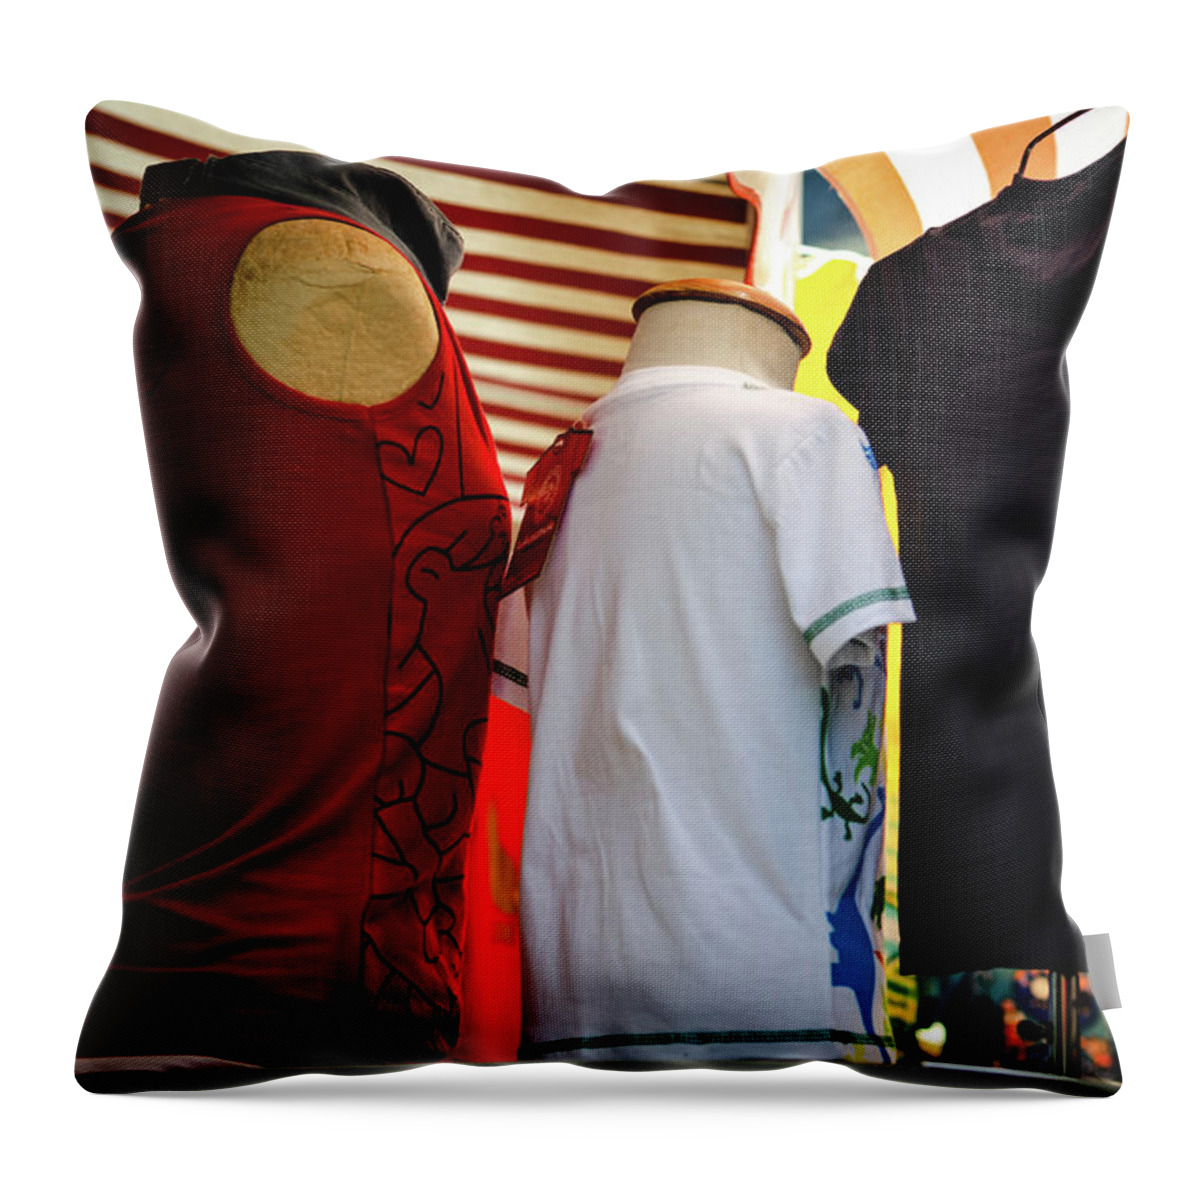 T-shirts Throw Pillow featuring the photograph T-shirts by Gavin Lewis